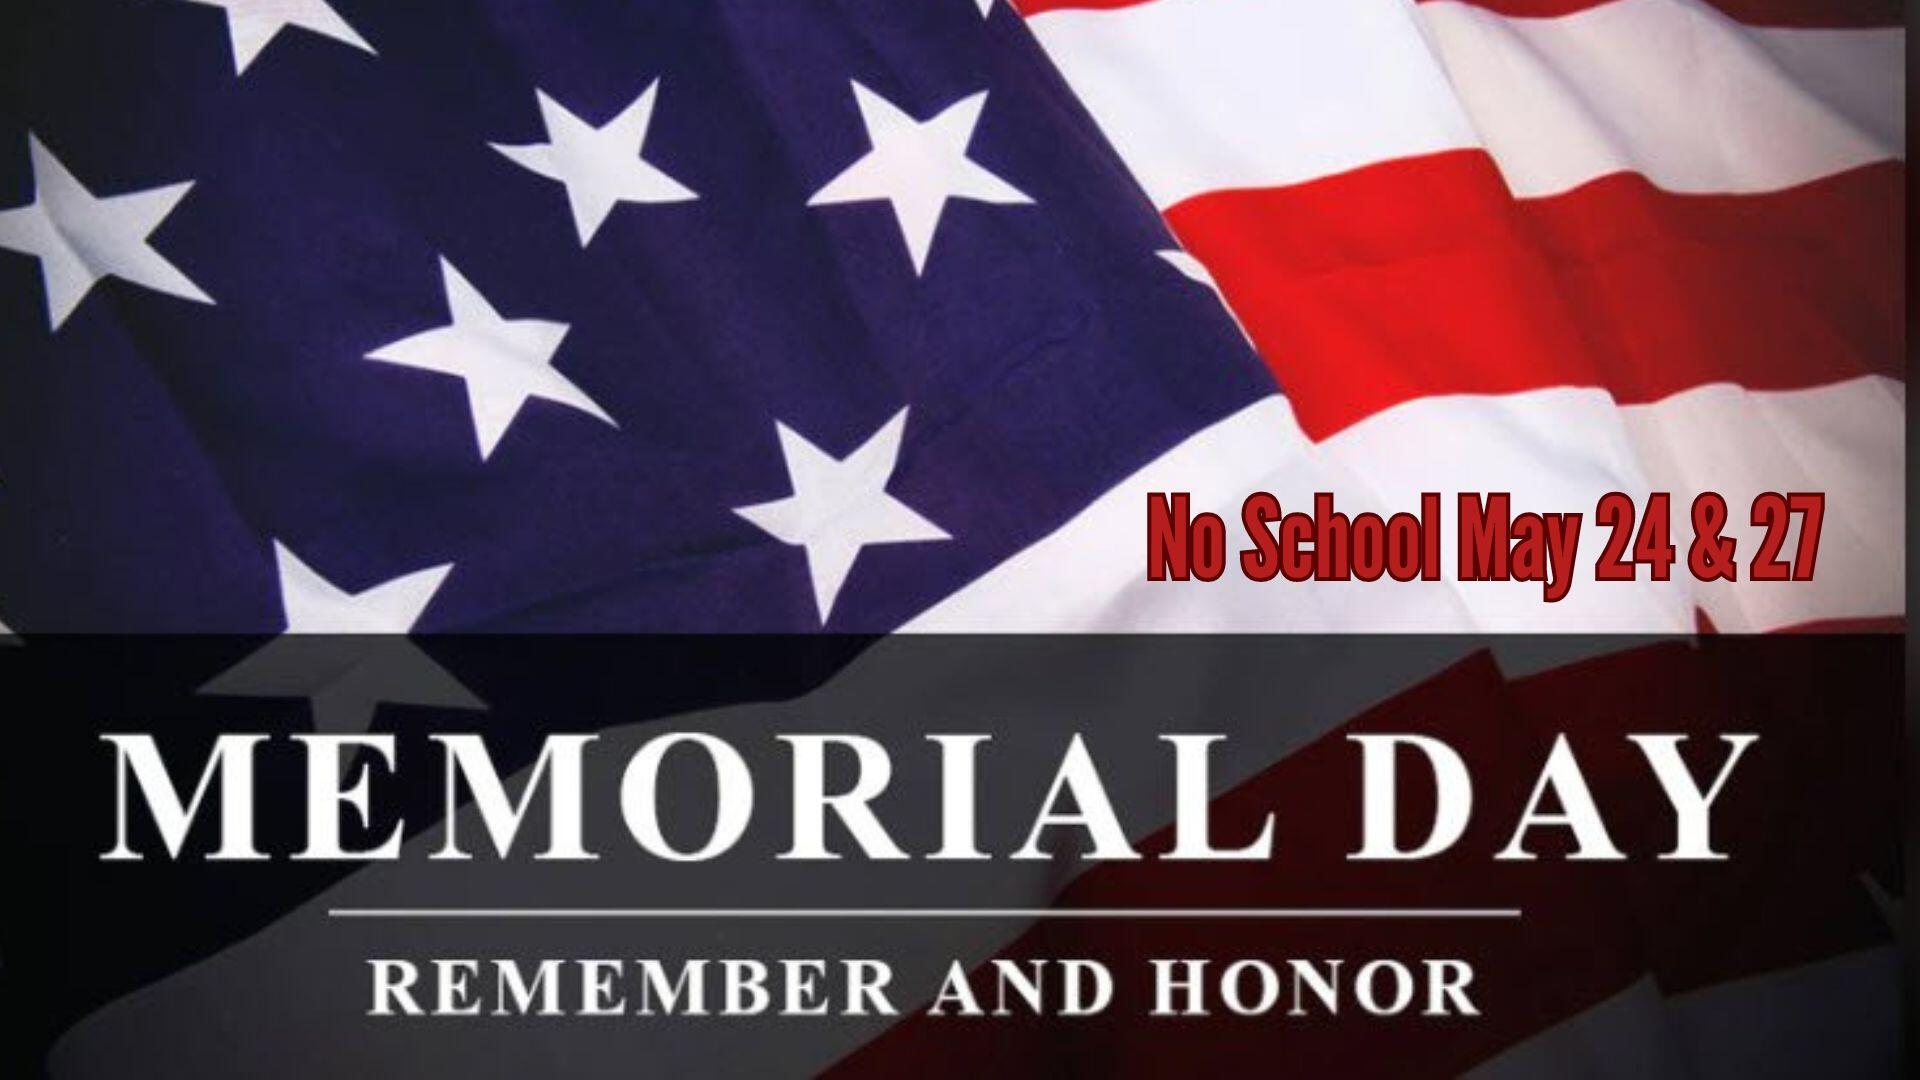 Memorial Day Weekend, No School May 24 and 27